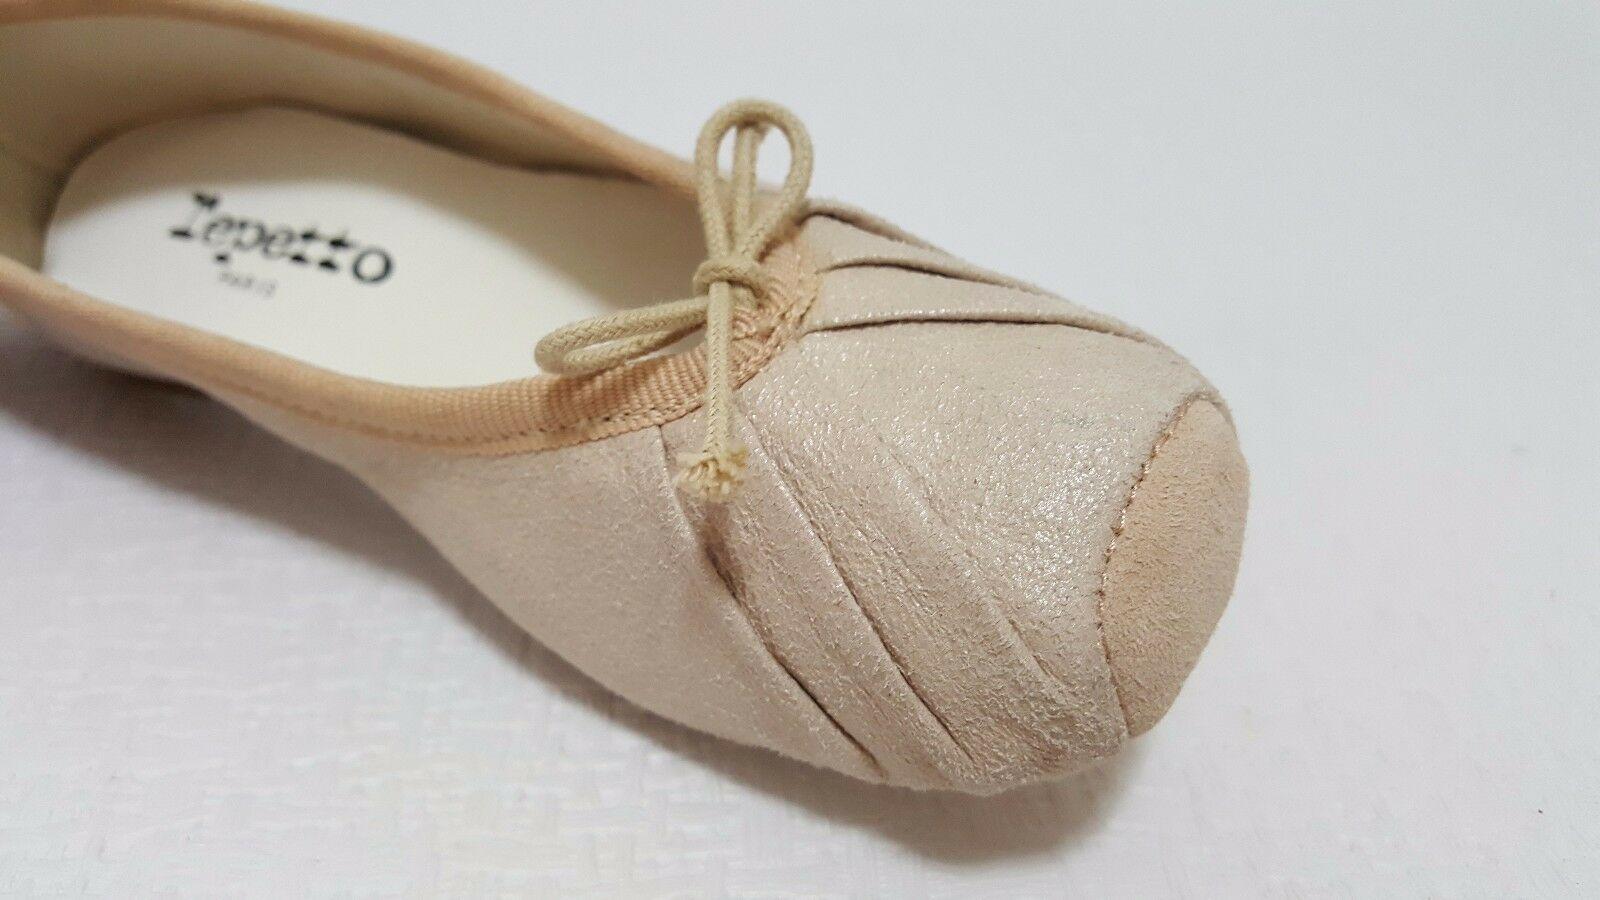 Repetto Kids Ballerinas Ballet Flats Leather Made In France Size EU 28 - SVNYFancy